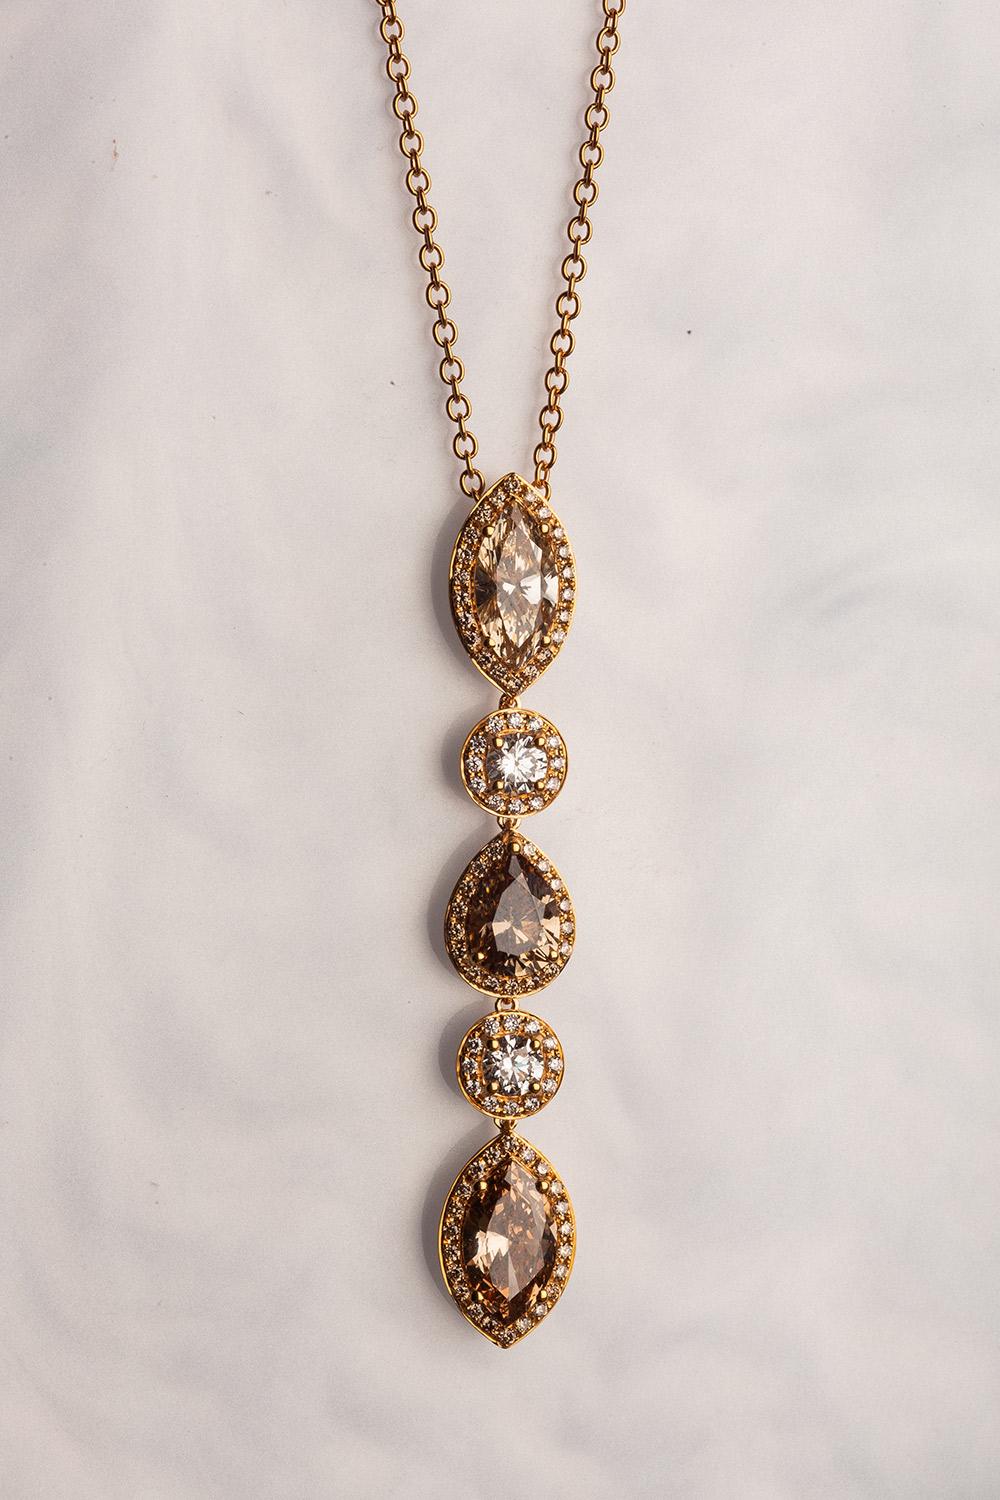 This 18K yellow gold elegant pendant is from our Divine Collection. It is made of 2 marquise shape brown diamonds in total of 2.04 Carat, pear shape brown diamond in total of 1.04 Carat and 2 round colorless diamonds in total of 0.52 Carat. All